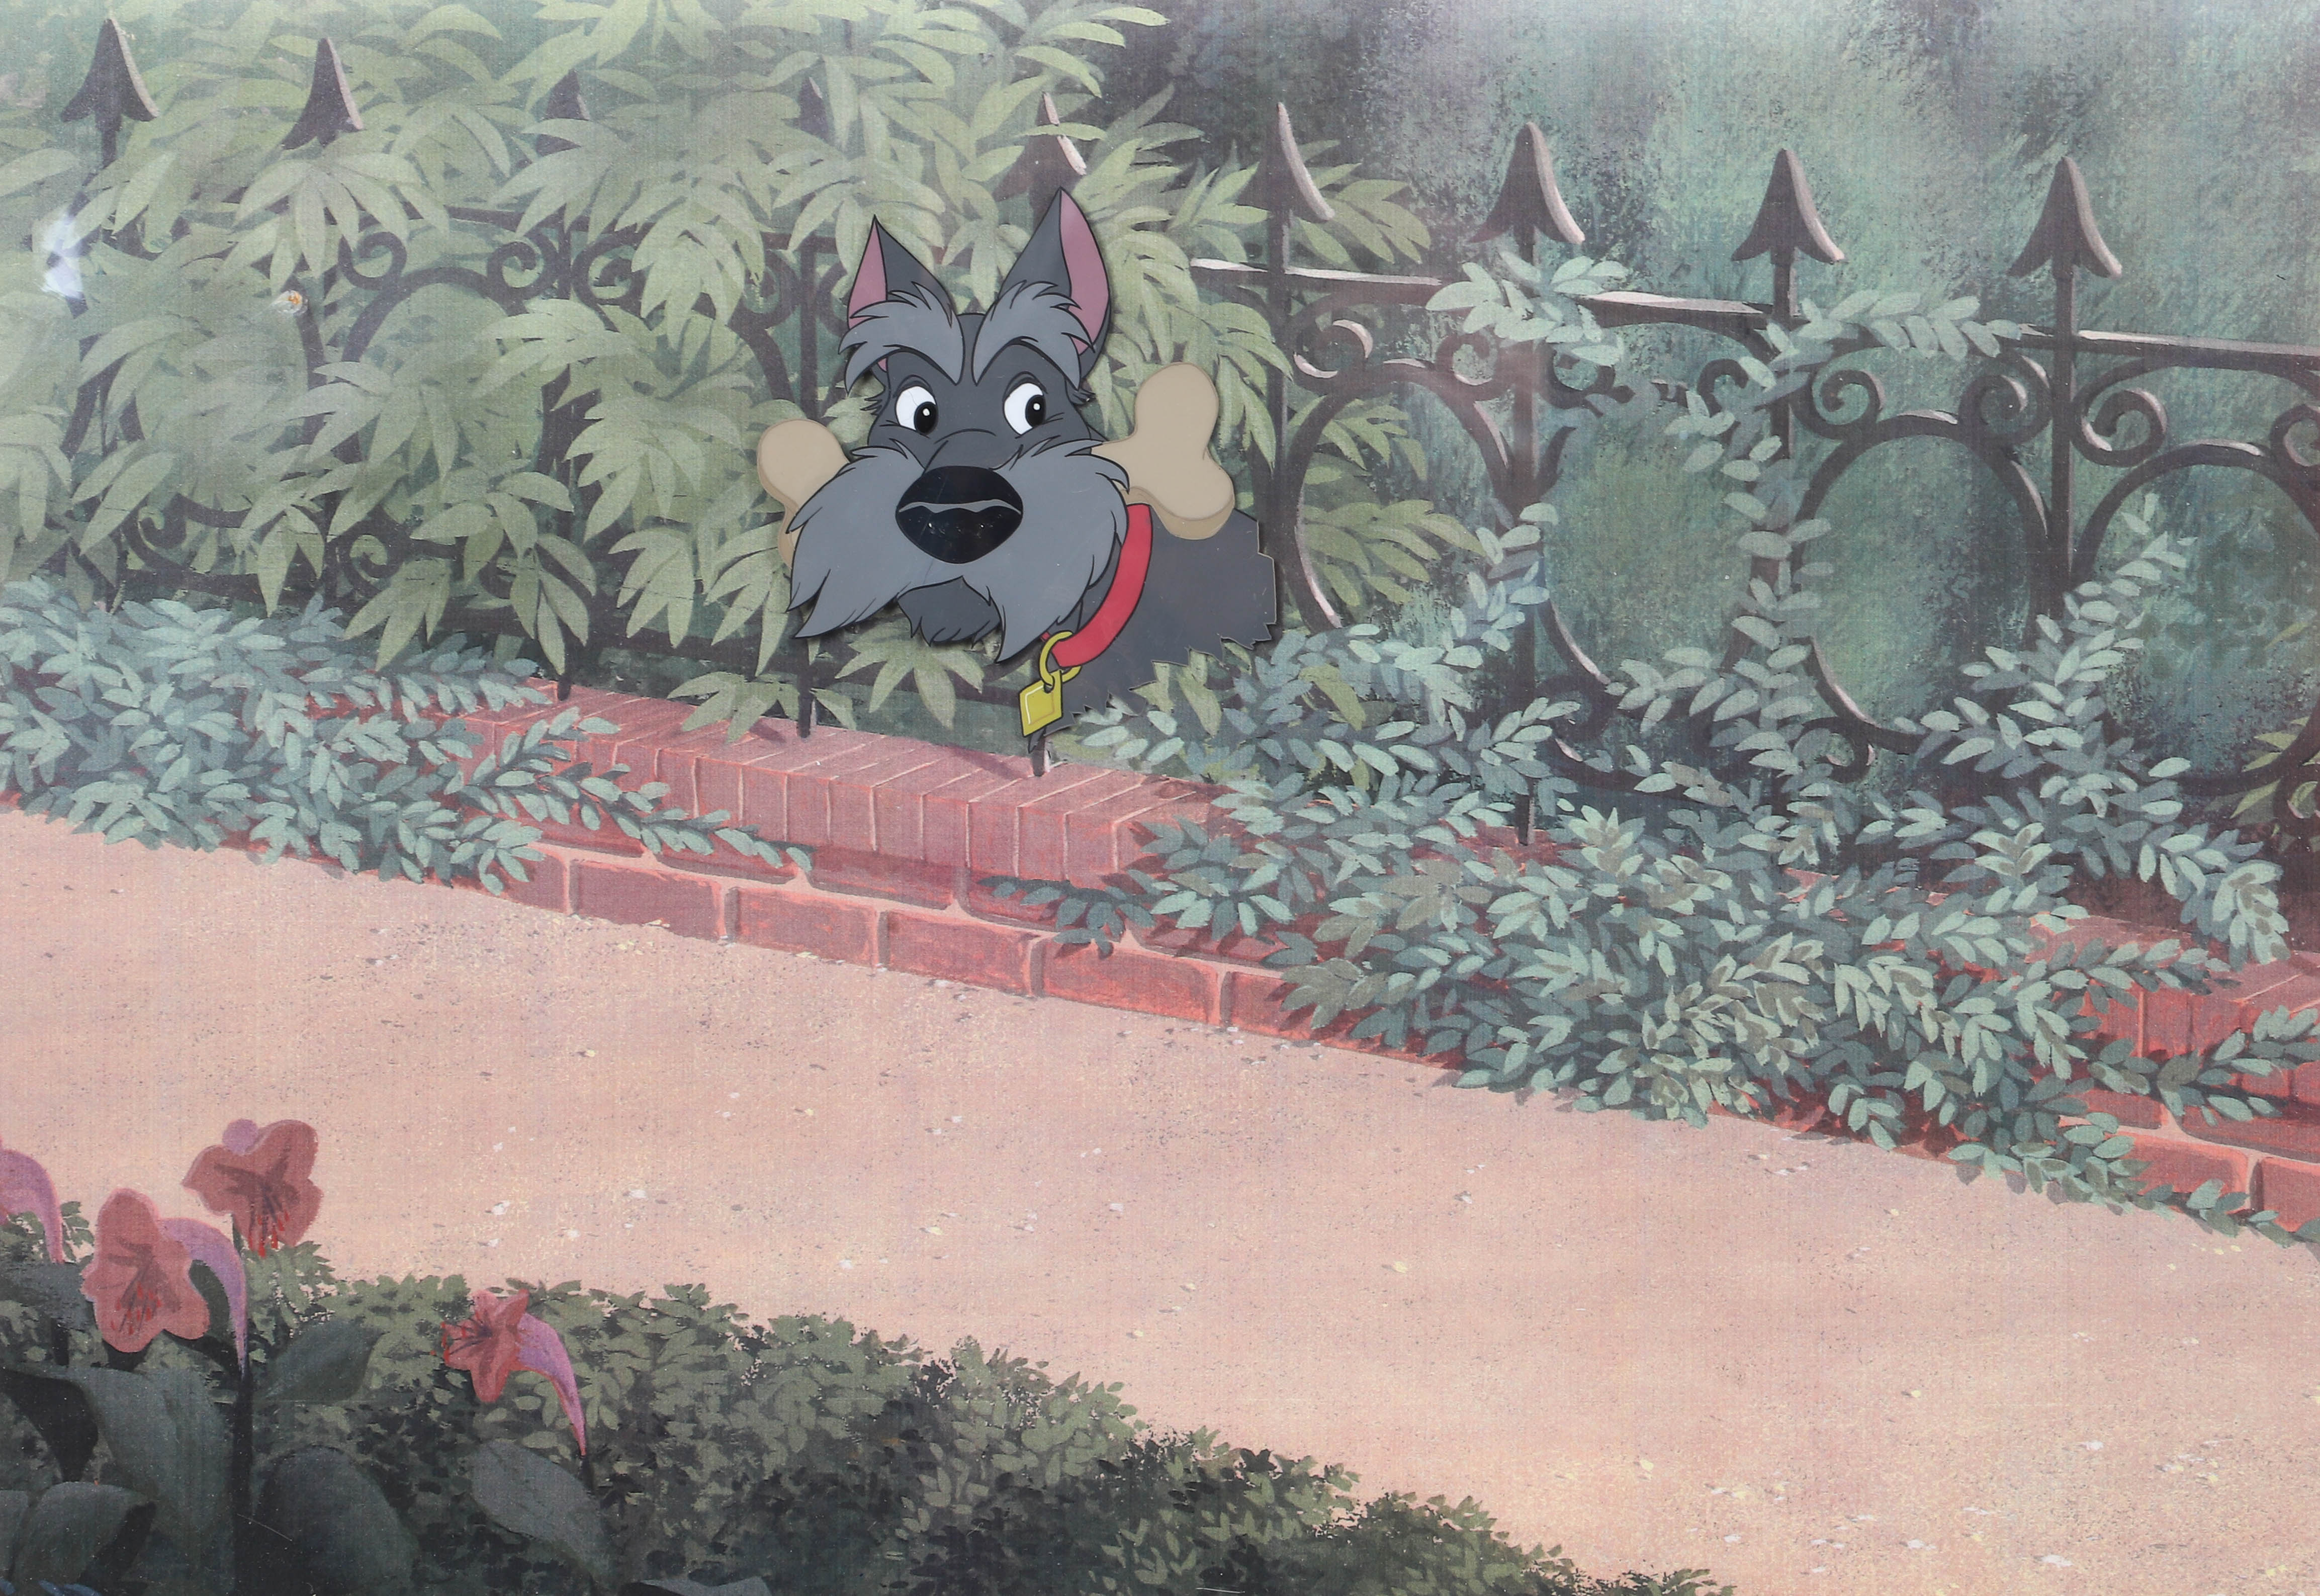 Lady and the Tramp production cel depicting